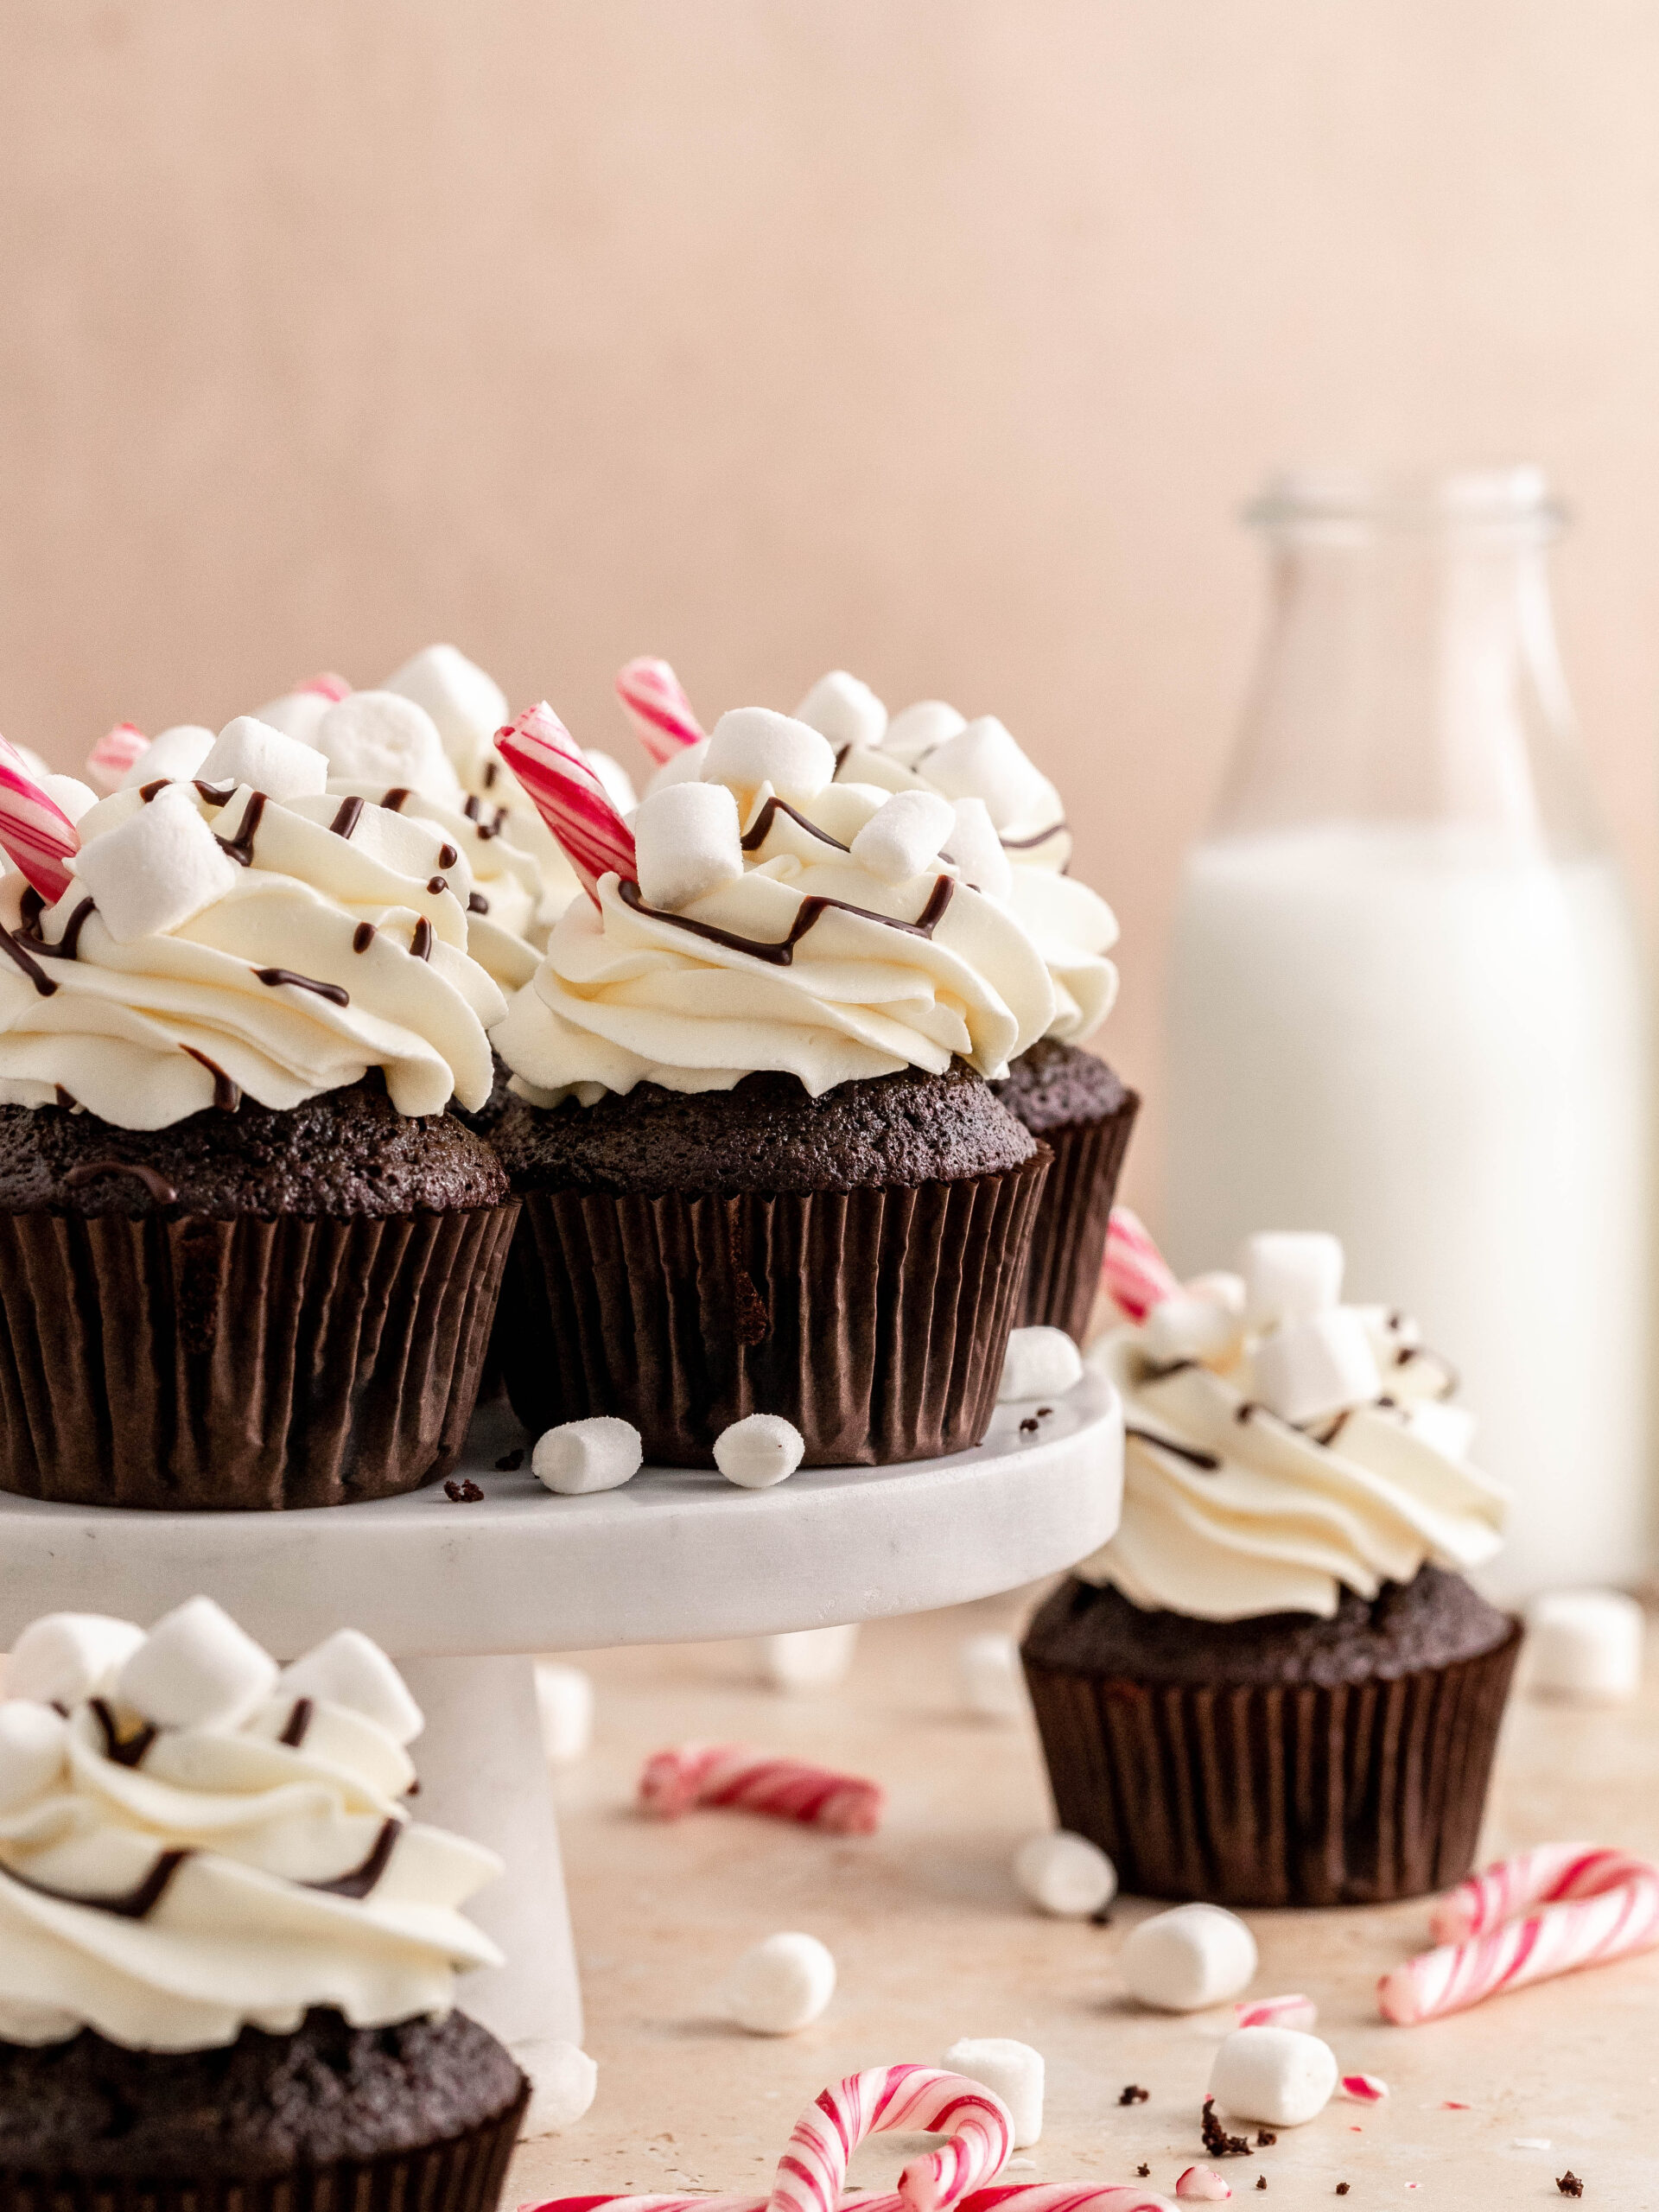 hot chocolate cupcakes on a cake stand.